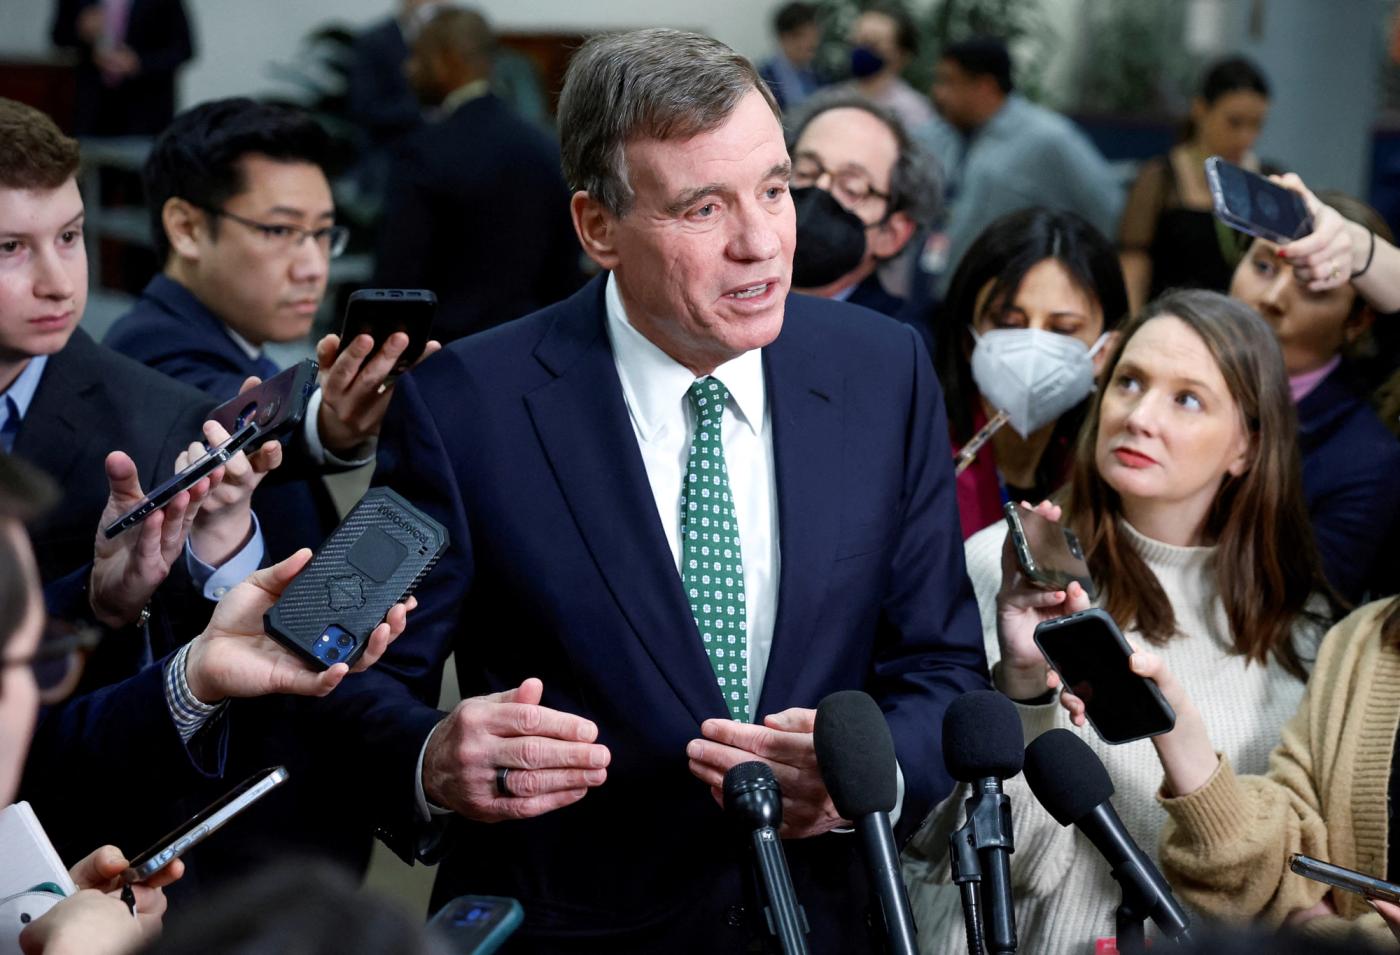 U.S. Senator Mark Warner (D-VA) speaks to the media following a classified briefing for U.S. Senators about the latest unknown objects shot down by the U.S. military, on Capitol Hill in Washington, U.S., February 14, 2023.